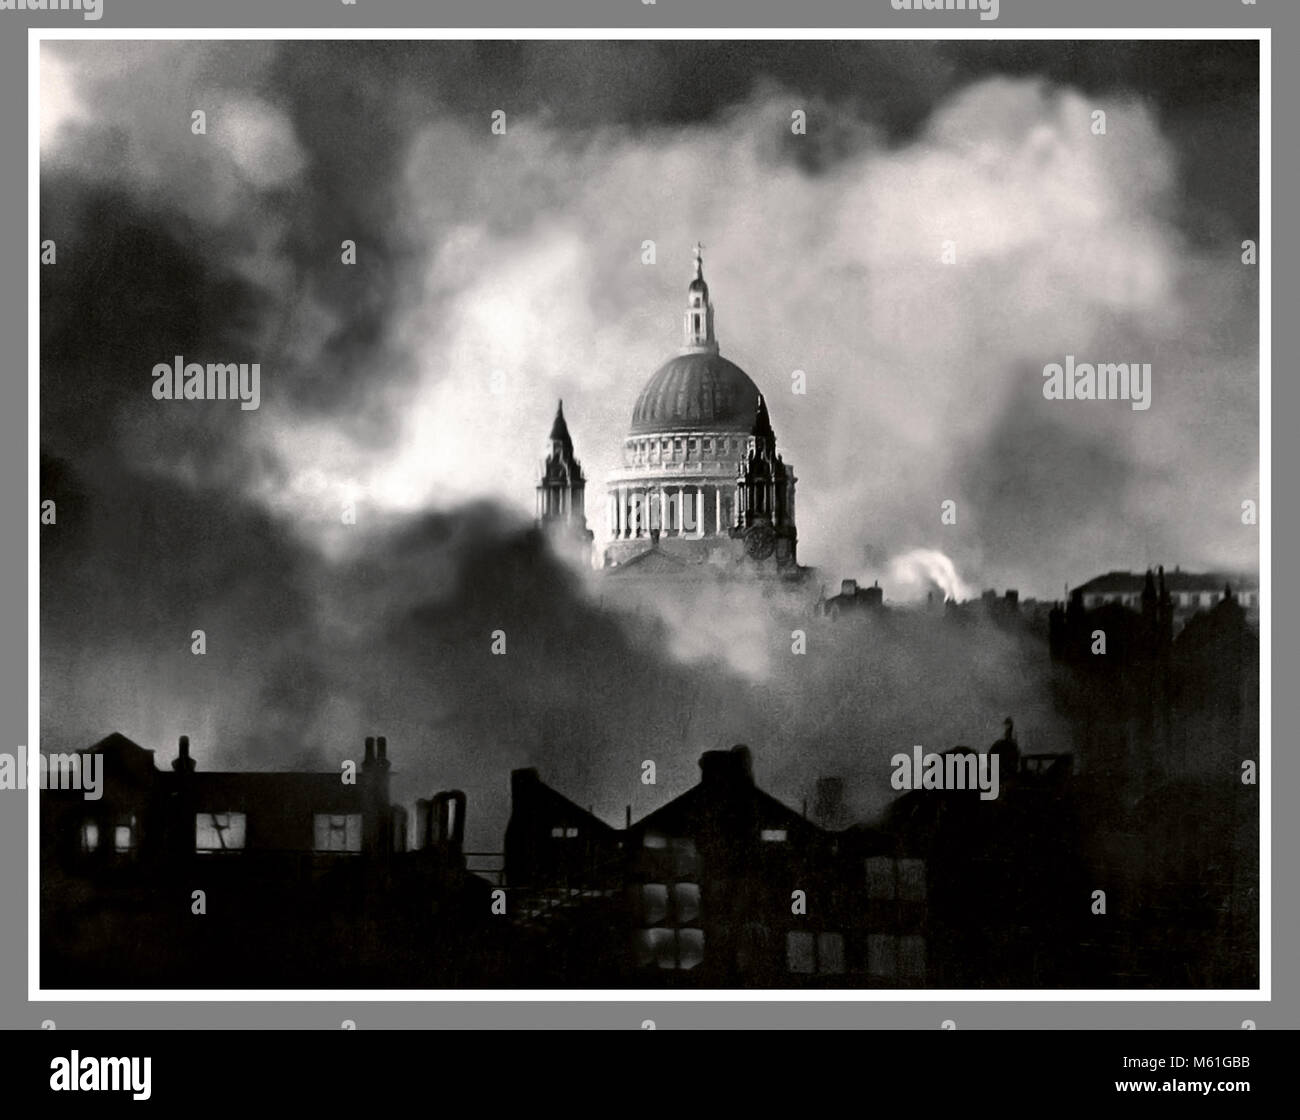 LONDON BLITZ WW2 SAINT PAULS CATHEDRAL NAZI GERMANY BOMBING St Paul's Survives. An iconic photograph of Saint Pauls Cathedral pre-planned and bravely taken in a night air raid 29/30th December 1940 by photographer Herbert Mason. This image became the symbol of resistance against the Nazi Germany Luftwaffe terror bombing of civilians. This photograph has been carefully restored and enhanced to re-create its original impact and quality. Stock Photo